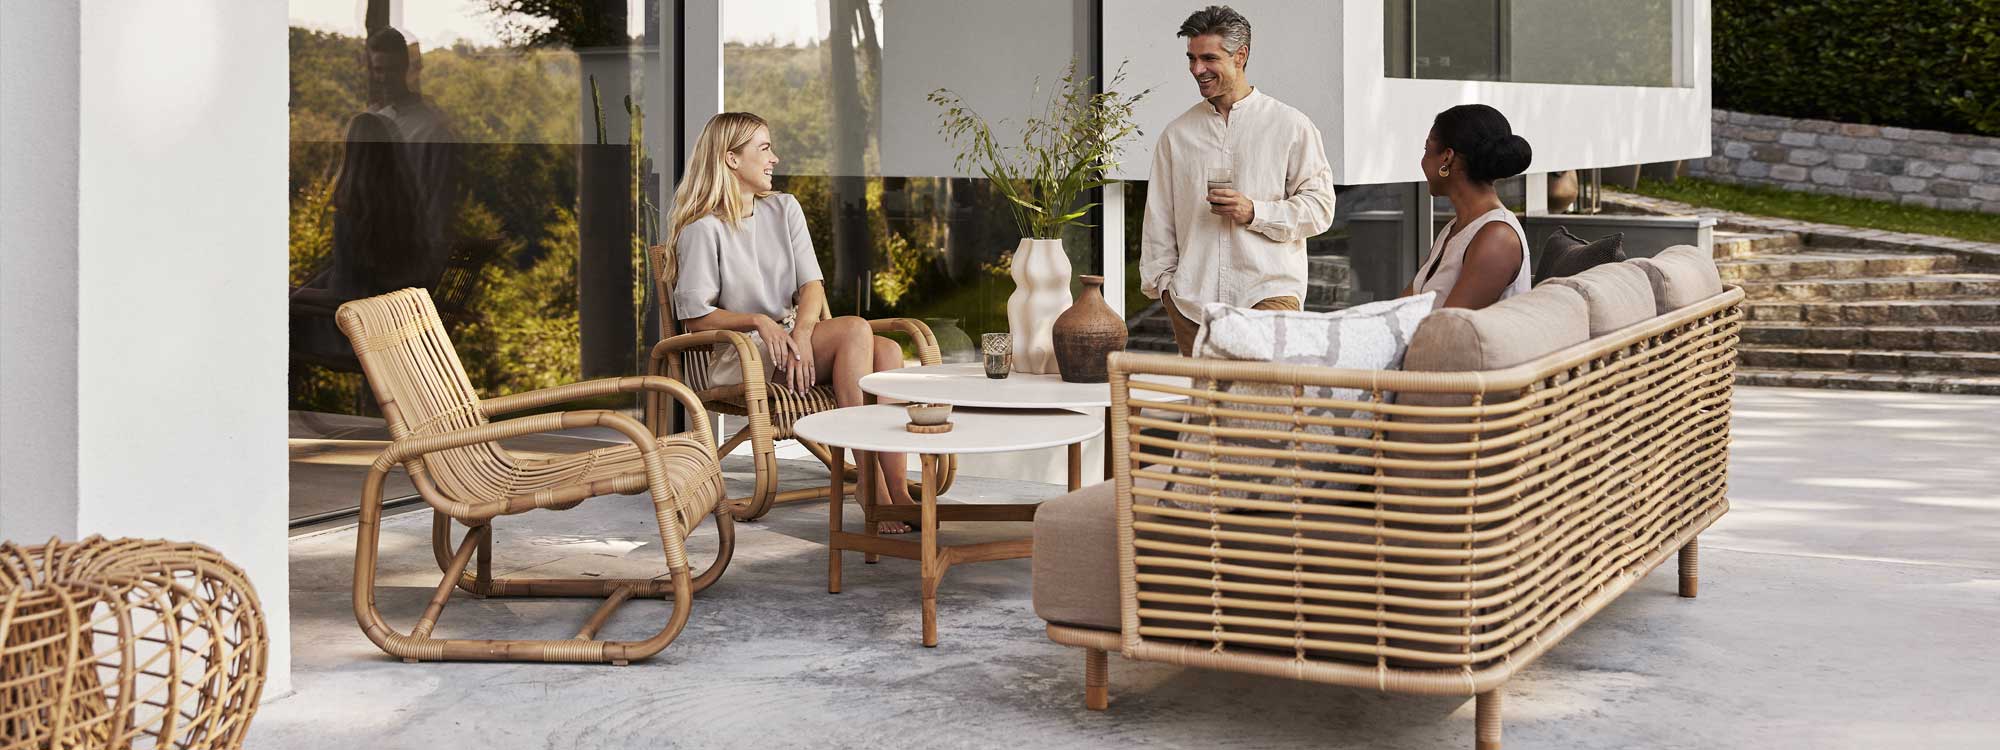 Image of 3 people enjoying Sense outdoor cane sofa and Twist teak low table by Cane-line garden furniture